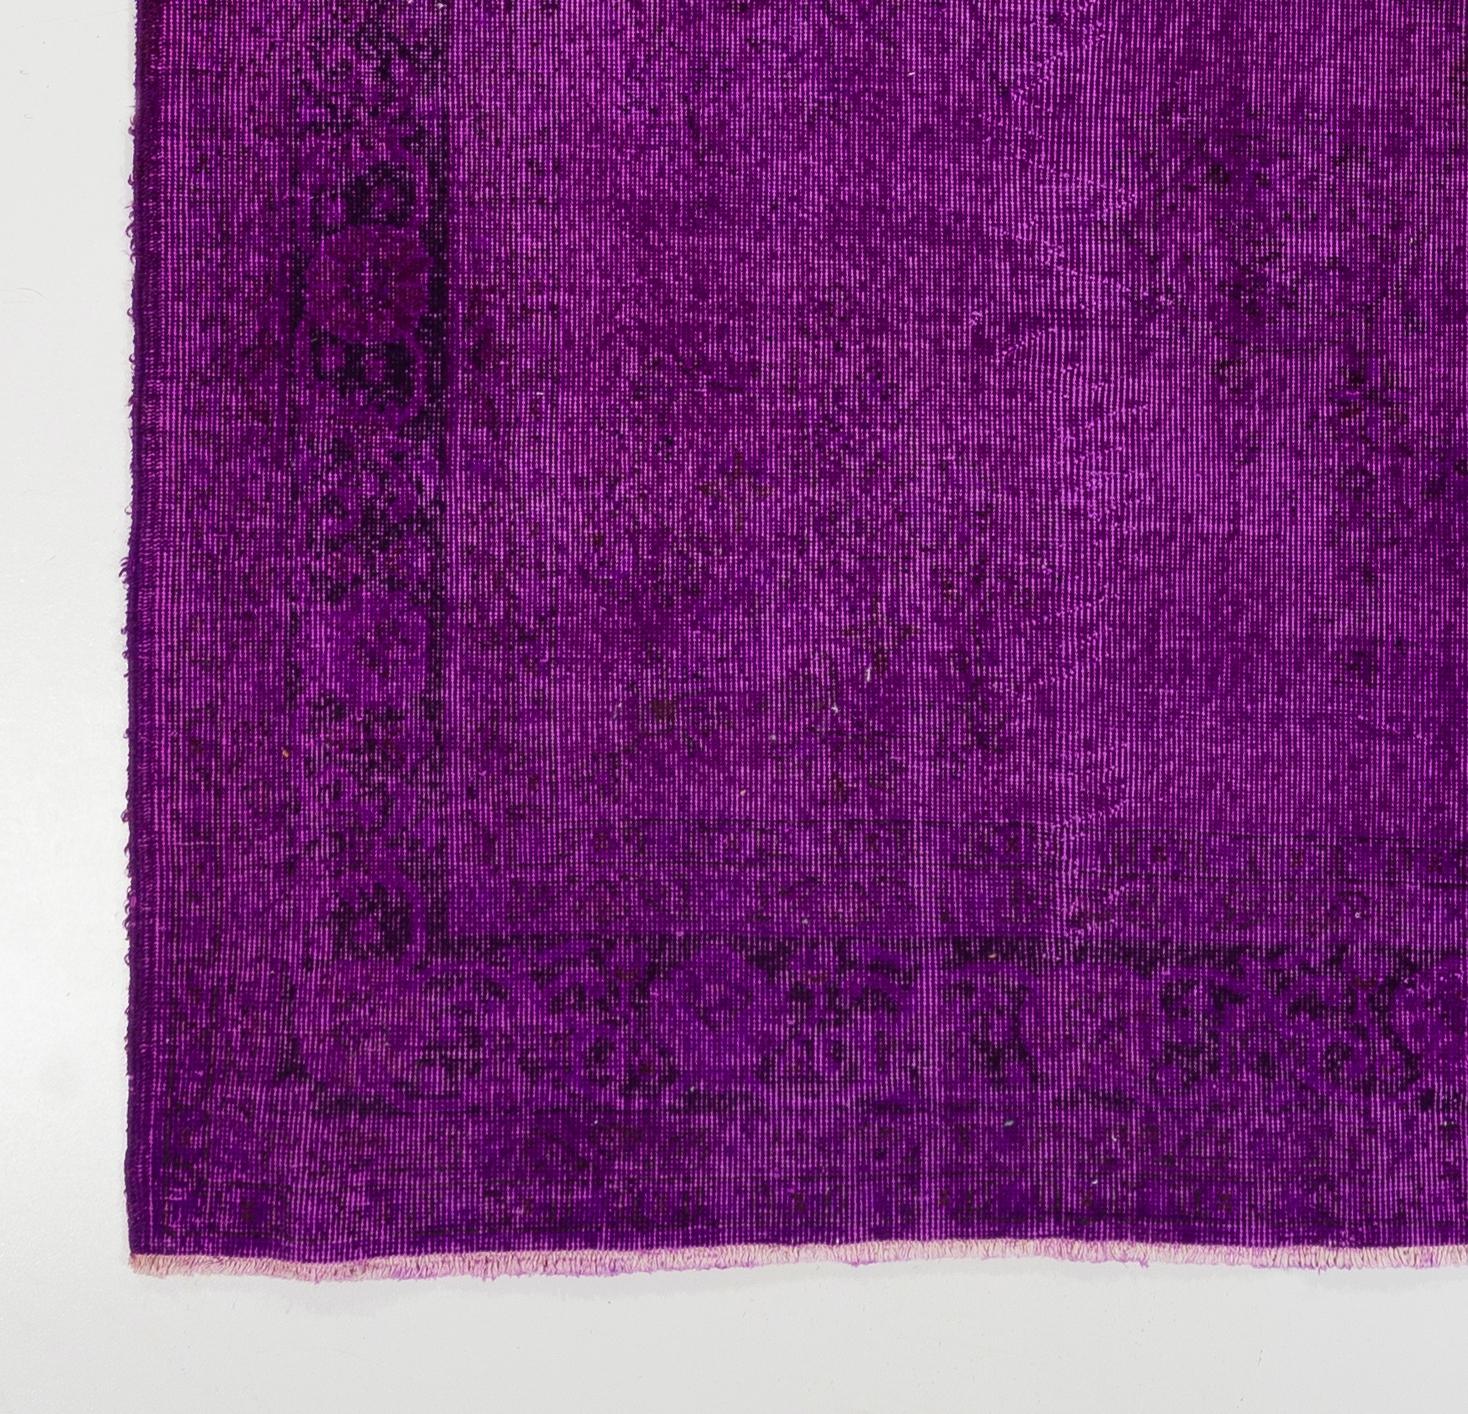 Hand-Woven 7x10.2 Ft Vintage Turkish Area Rug Overdyed in Purple Color for Modern Interiors